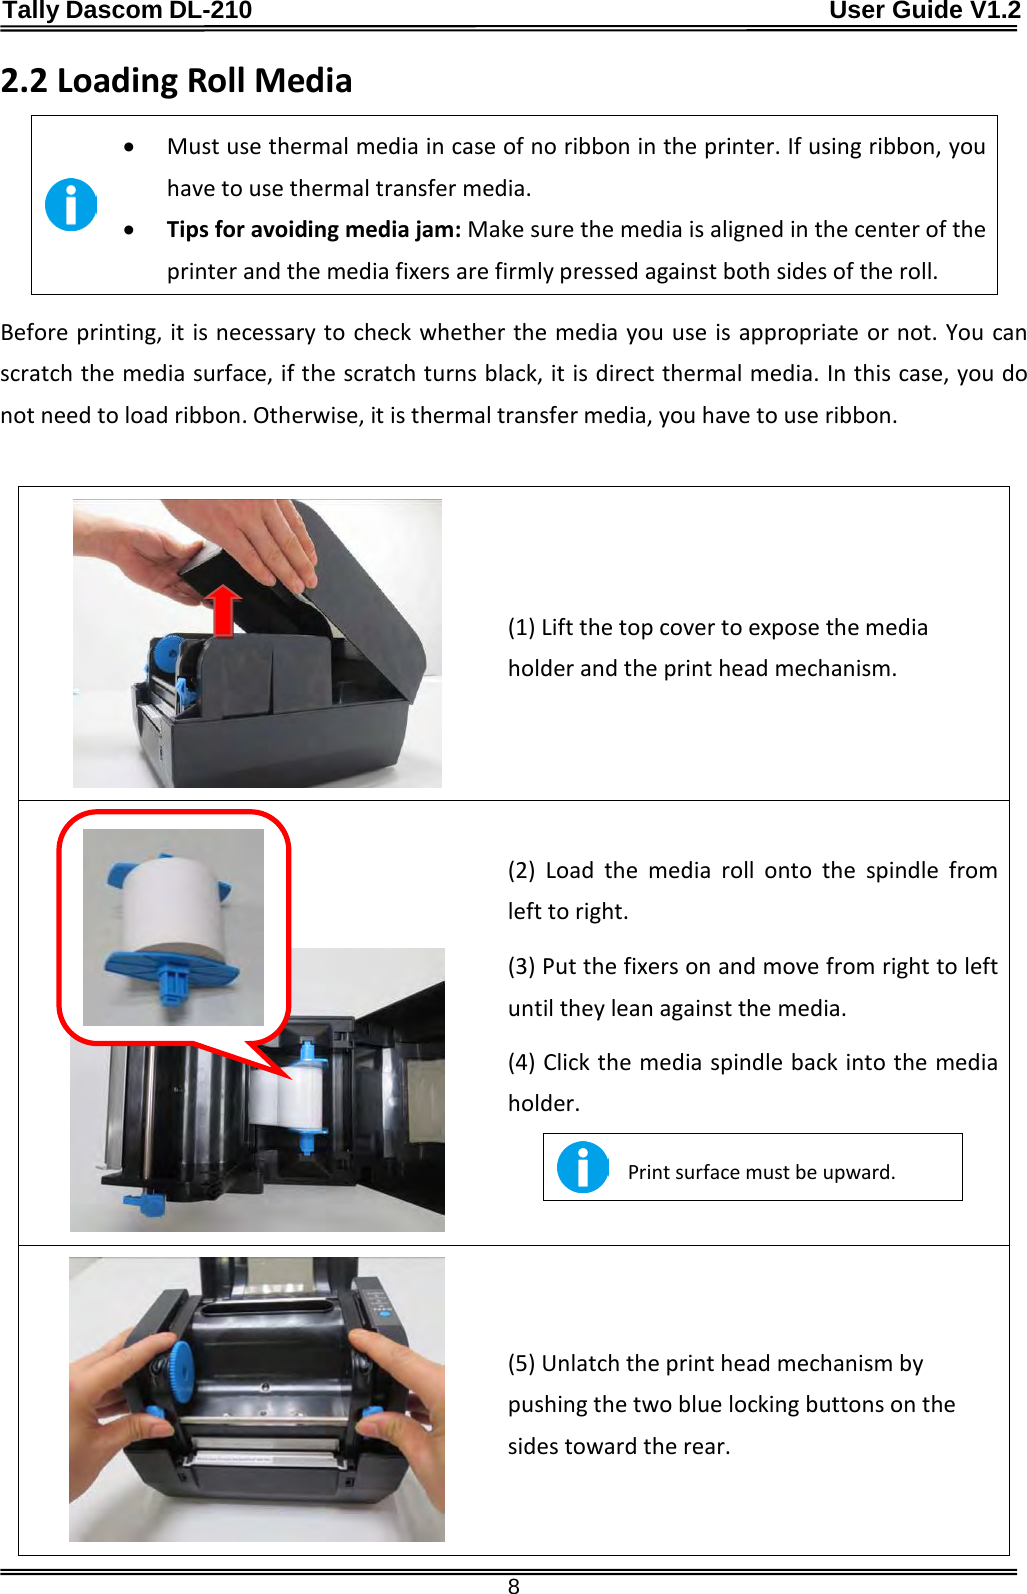 Tally Dascom DL-210                                              User Guide V1.2  8 2.2 Loading Roll Media  • Must use thermal media in case of no ribbon in the printer. If using ribbon, you have to use thermal transfer media. • Tips for avoiding media jam: Make sure the media is aligned in the center of the printer and the media fixers are firmly pressed against both sides of the roll. Before printing, it is necessary to check whether the media you use is appropriate or not. You can scratch the media surface, if the scratch turns black, it is direct thermal media. In this case, you do not need to load ribbon. Otherwise, it is thermal transfer media, you have to use ribbon.   (1) Lift the top cover to expose the media holder and the print head mechanism.     (2)  Load the media roll onto the spindle from left to right.  (3) Put the fixers on and move from right to left until they lean against the media.   (4) Click the media spindle back into the media holder.  Print surface must be upward.   (5) Unlatch the print head mechanism by pushing the two blue locking buttons on the sides toward the rear.  